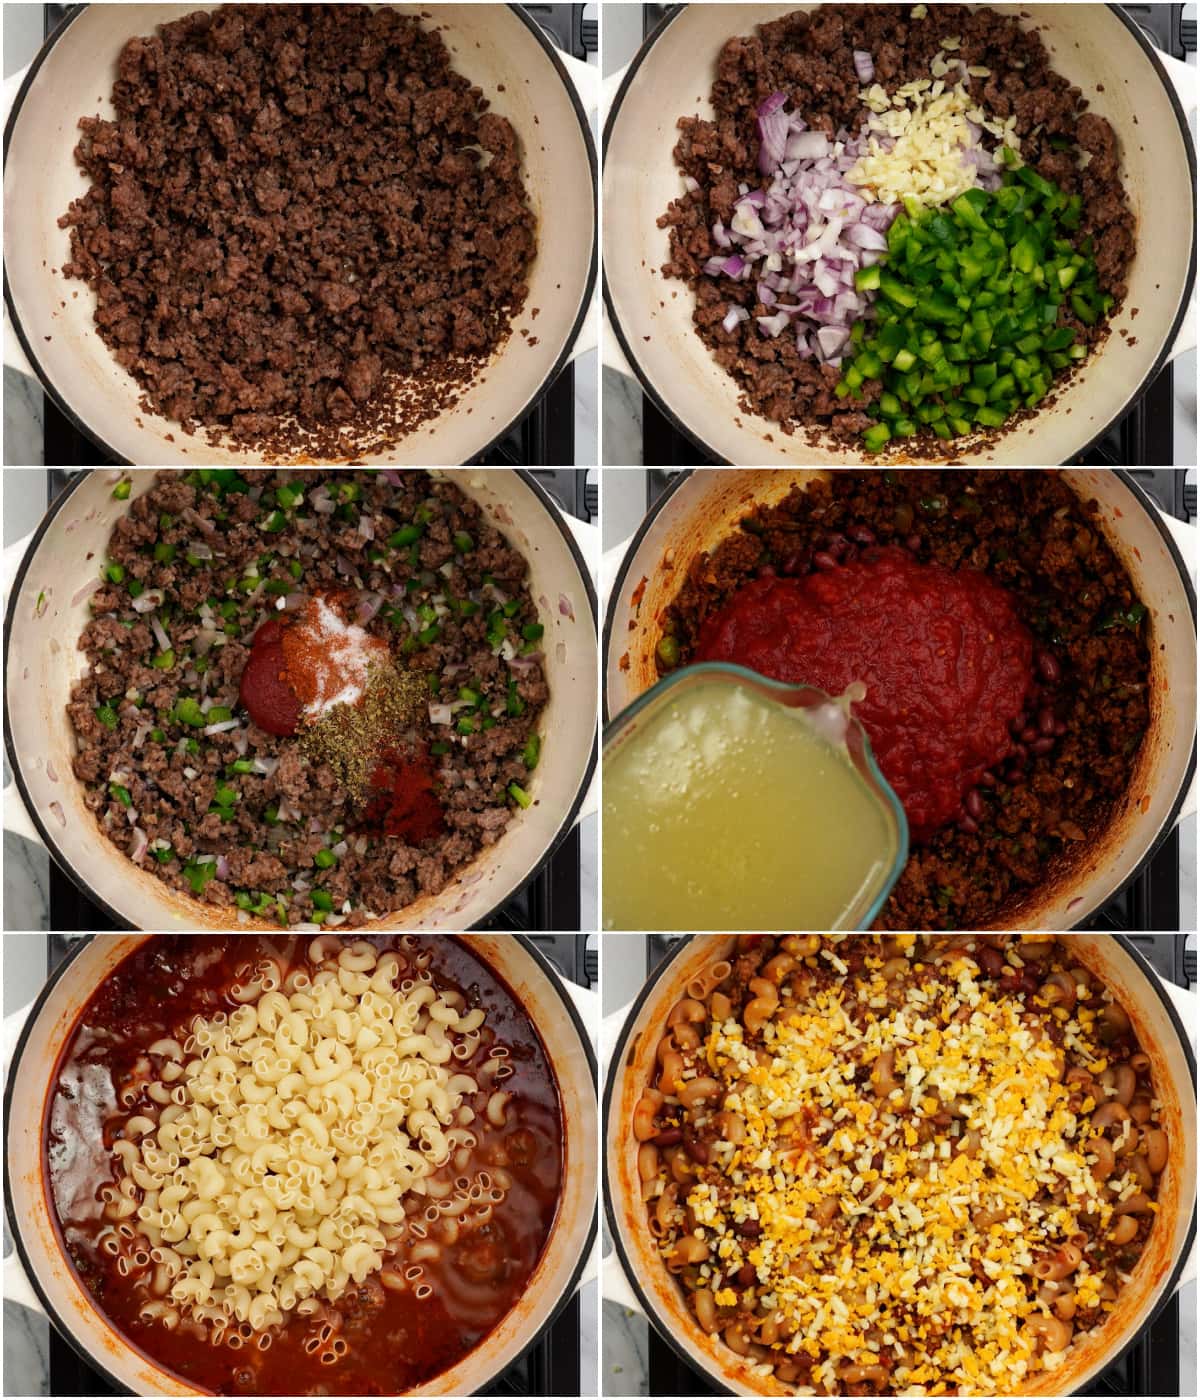 Step by step pictures of how to make chili mac and cheese